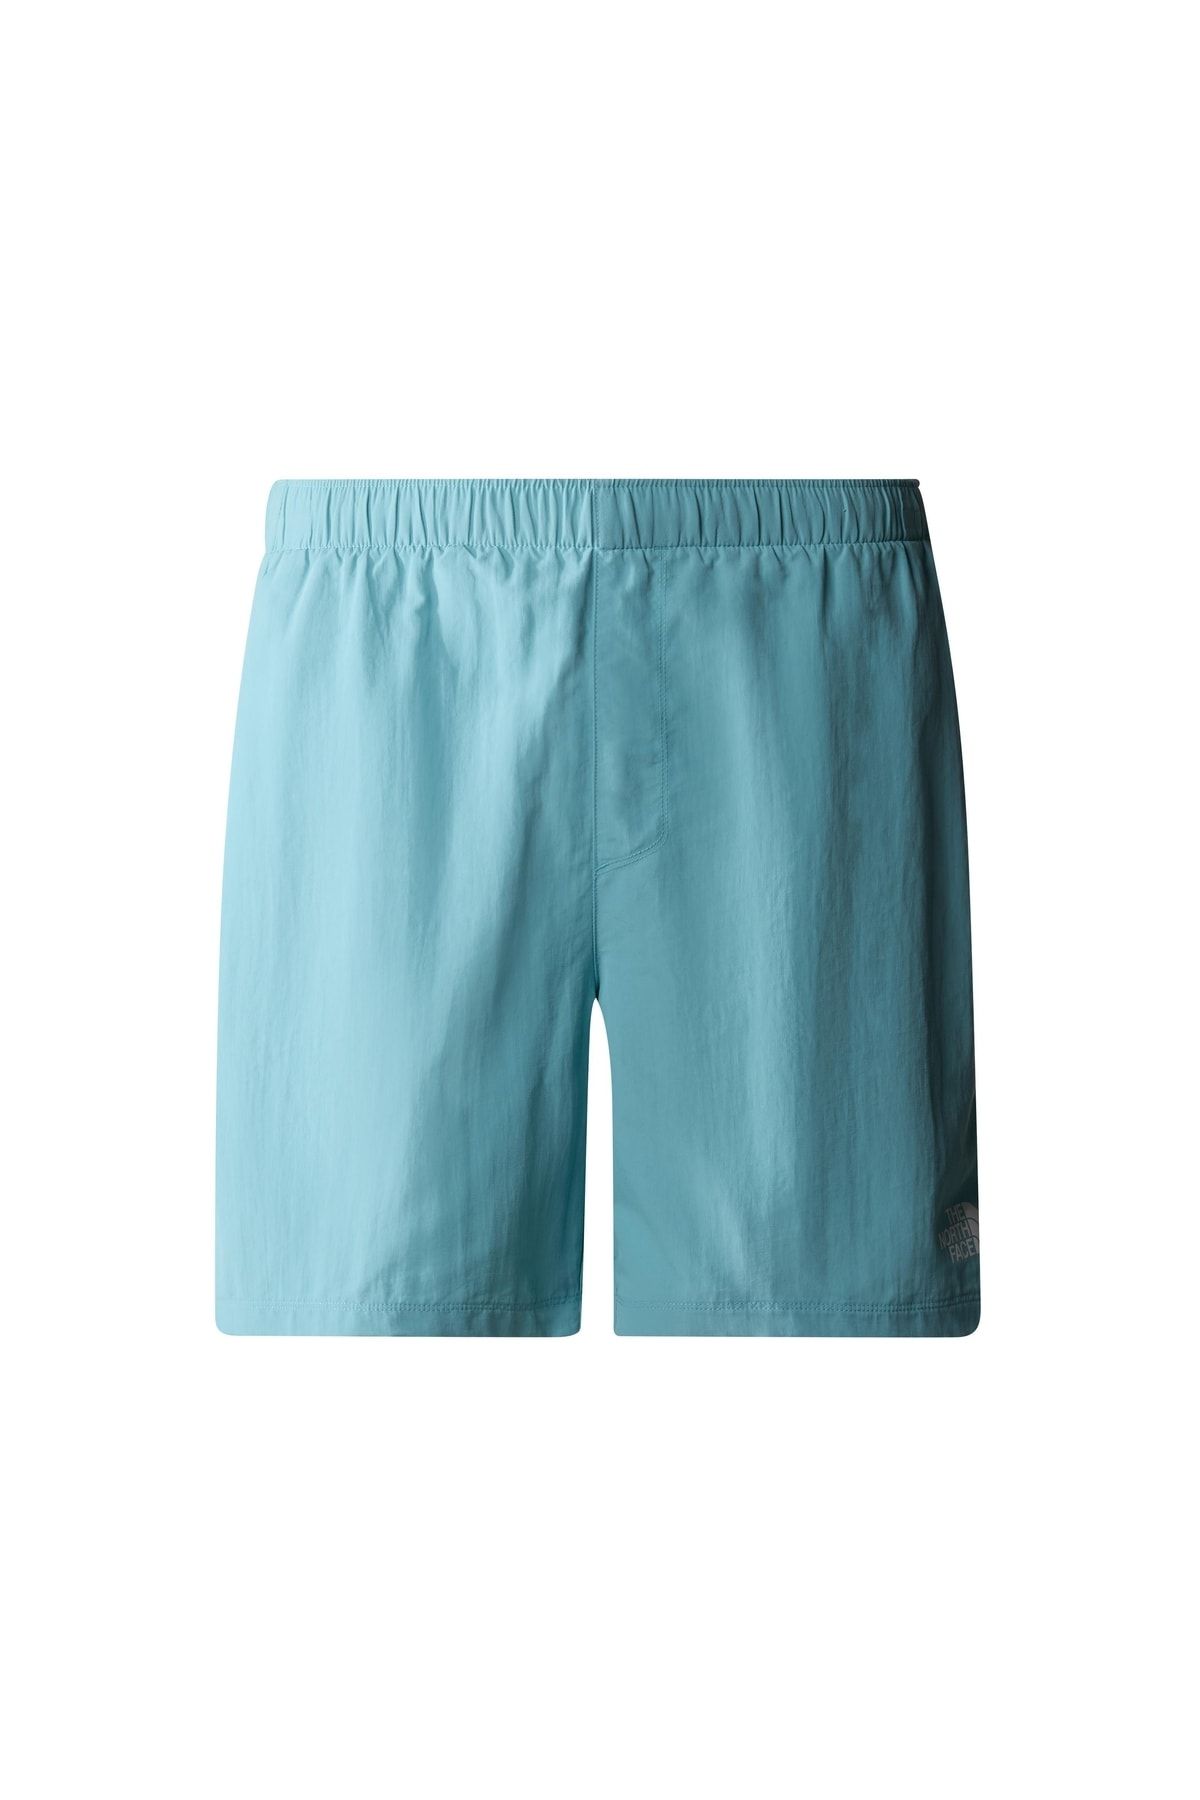 The North Face M Water Short - Eu Nf0a5ıg5lv21